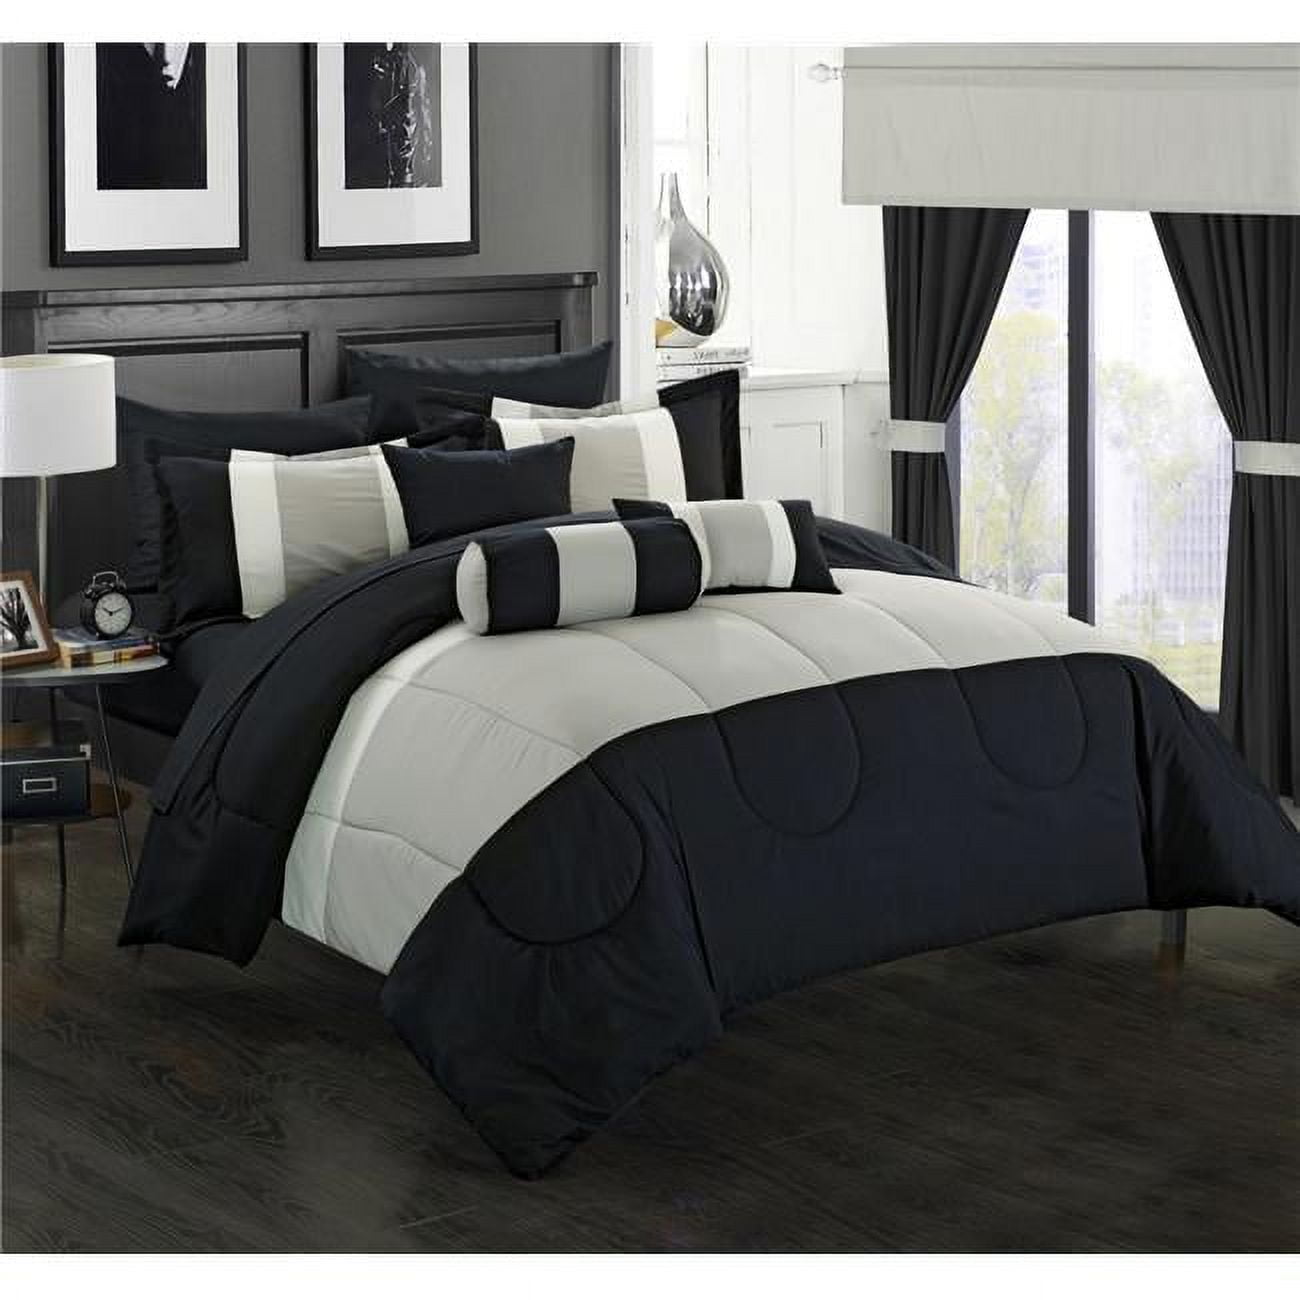 20 Piece Standon Complete Pieced Color Block Bedding, Sheets, Window Panel Collection Queen Bed In A Bag Comforter Set, Black Sheets